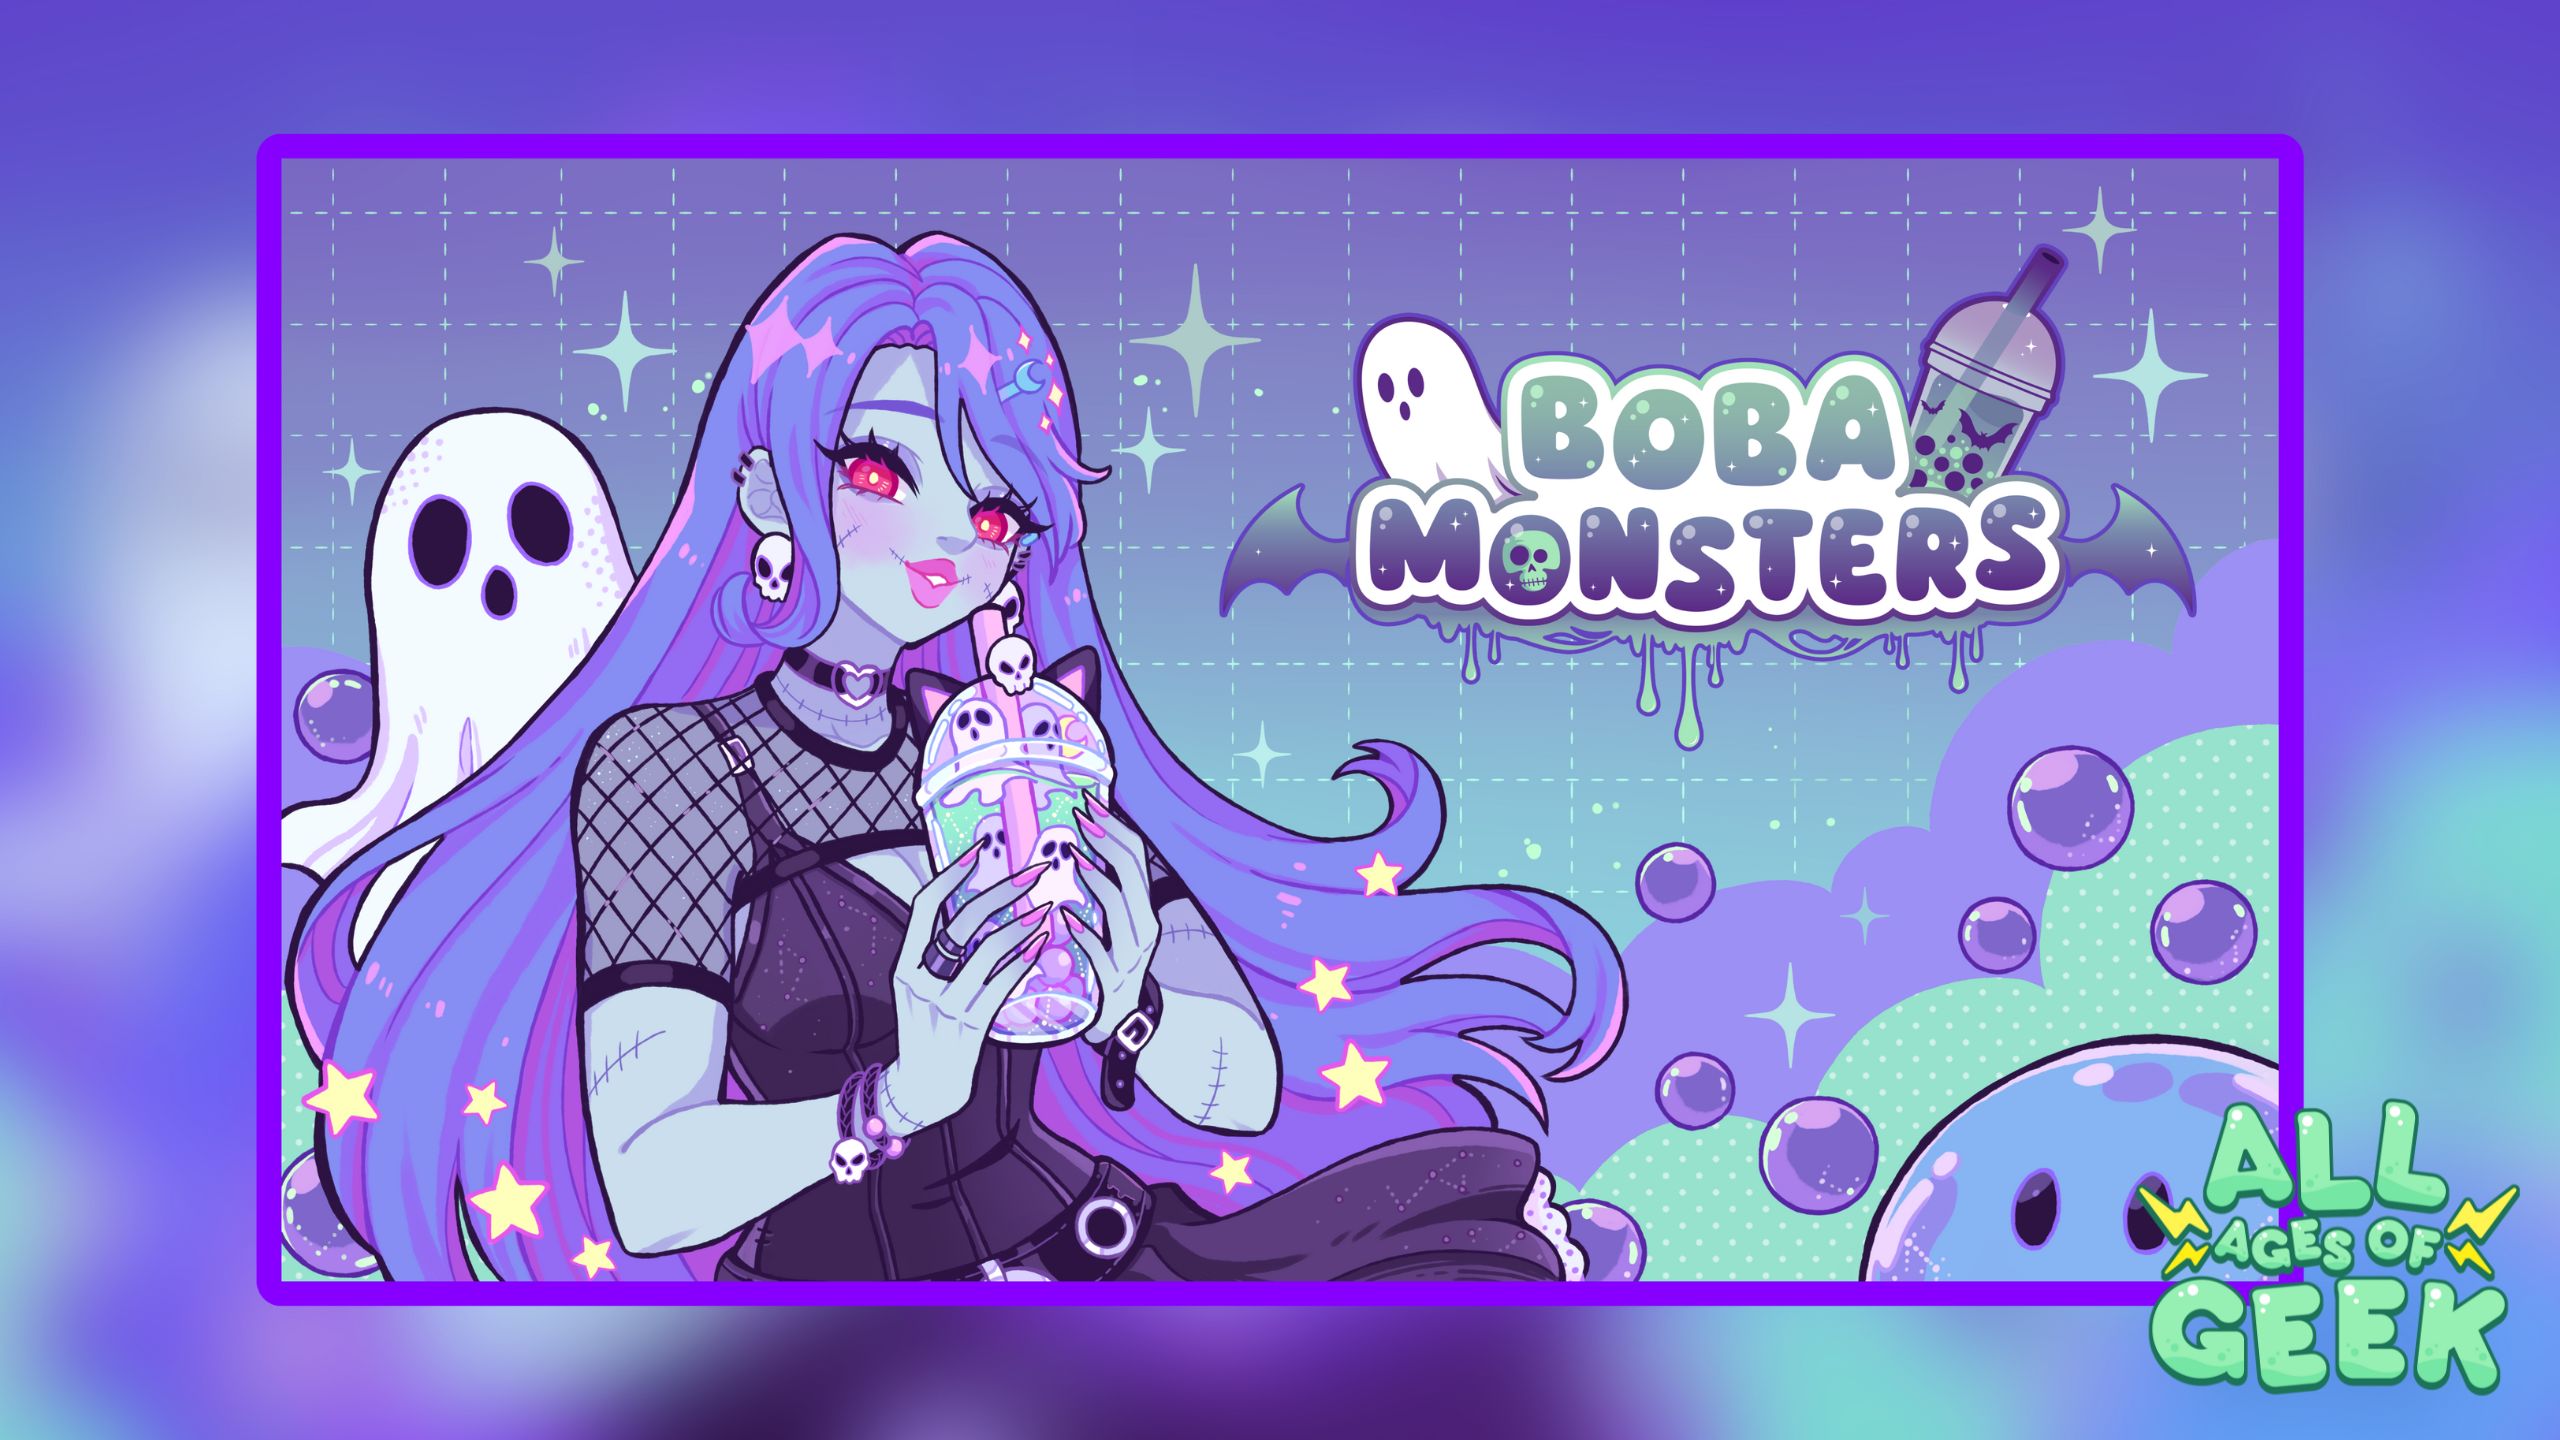 Image of a character from the game Boba Monsters. The character has long, flowing purple hair, red eyes, and is wearing gothic-style clothing with skull accessories. They are holding a colorful boba tea cup with cute monster-themed decorations. In the background, there are ghost and bat elements along with the Boba Monsters logo. The All Ages of Geek logo is visible in the bottom right corner.